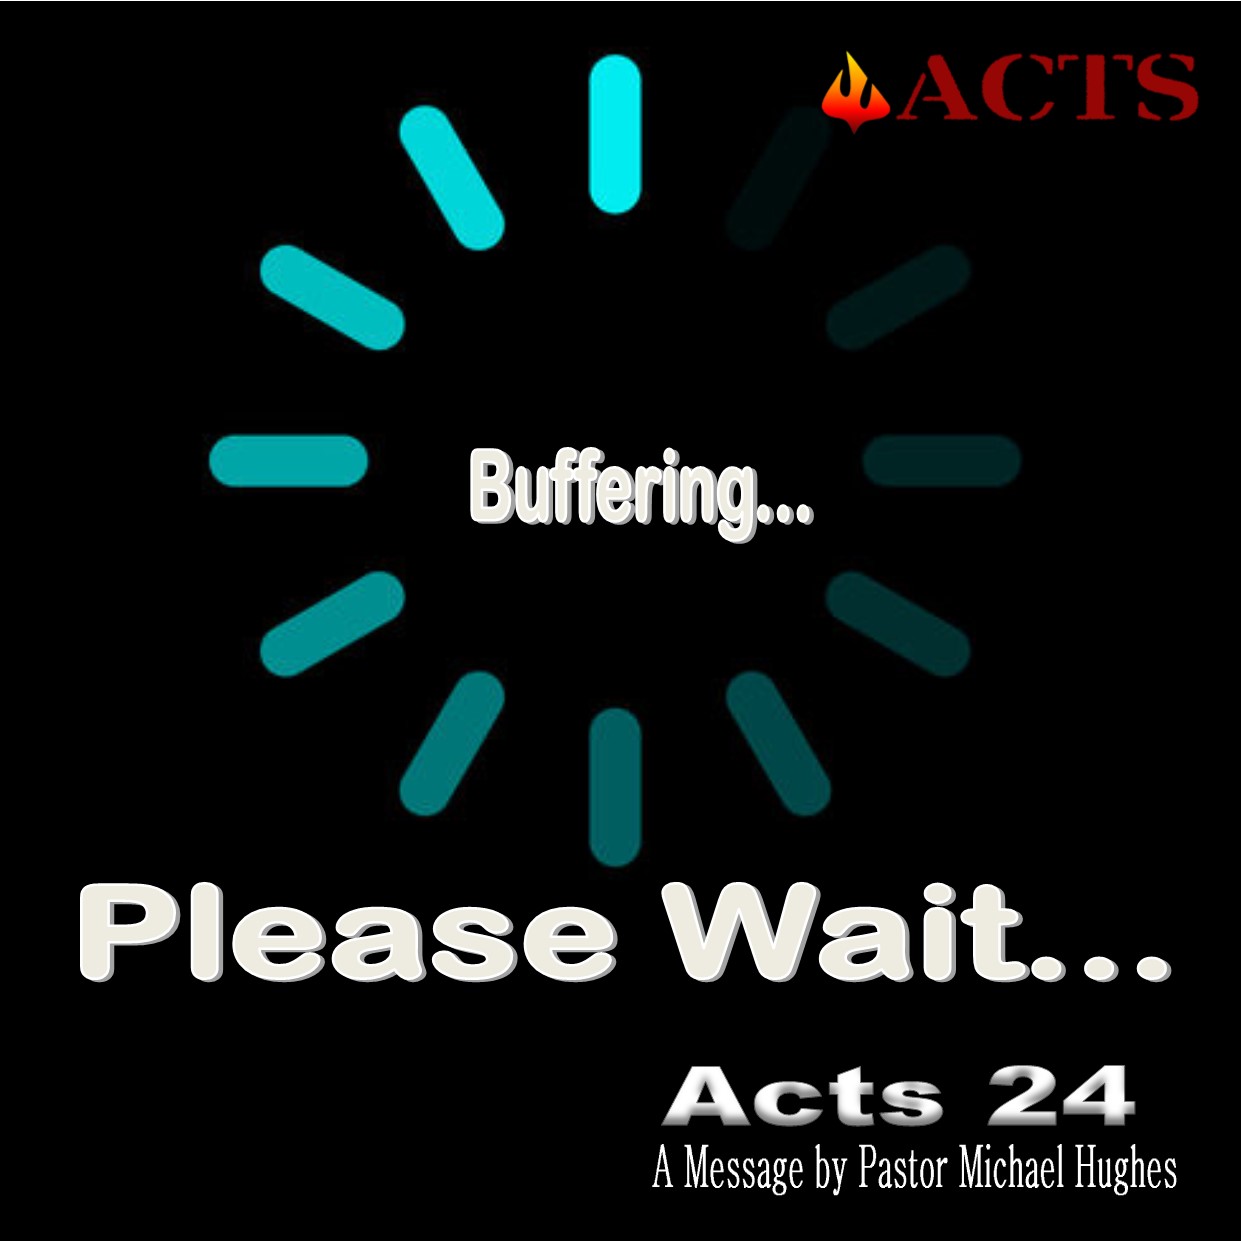 Acts 24 